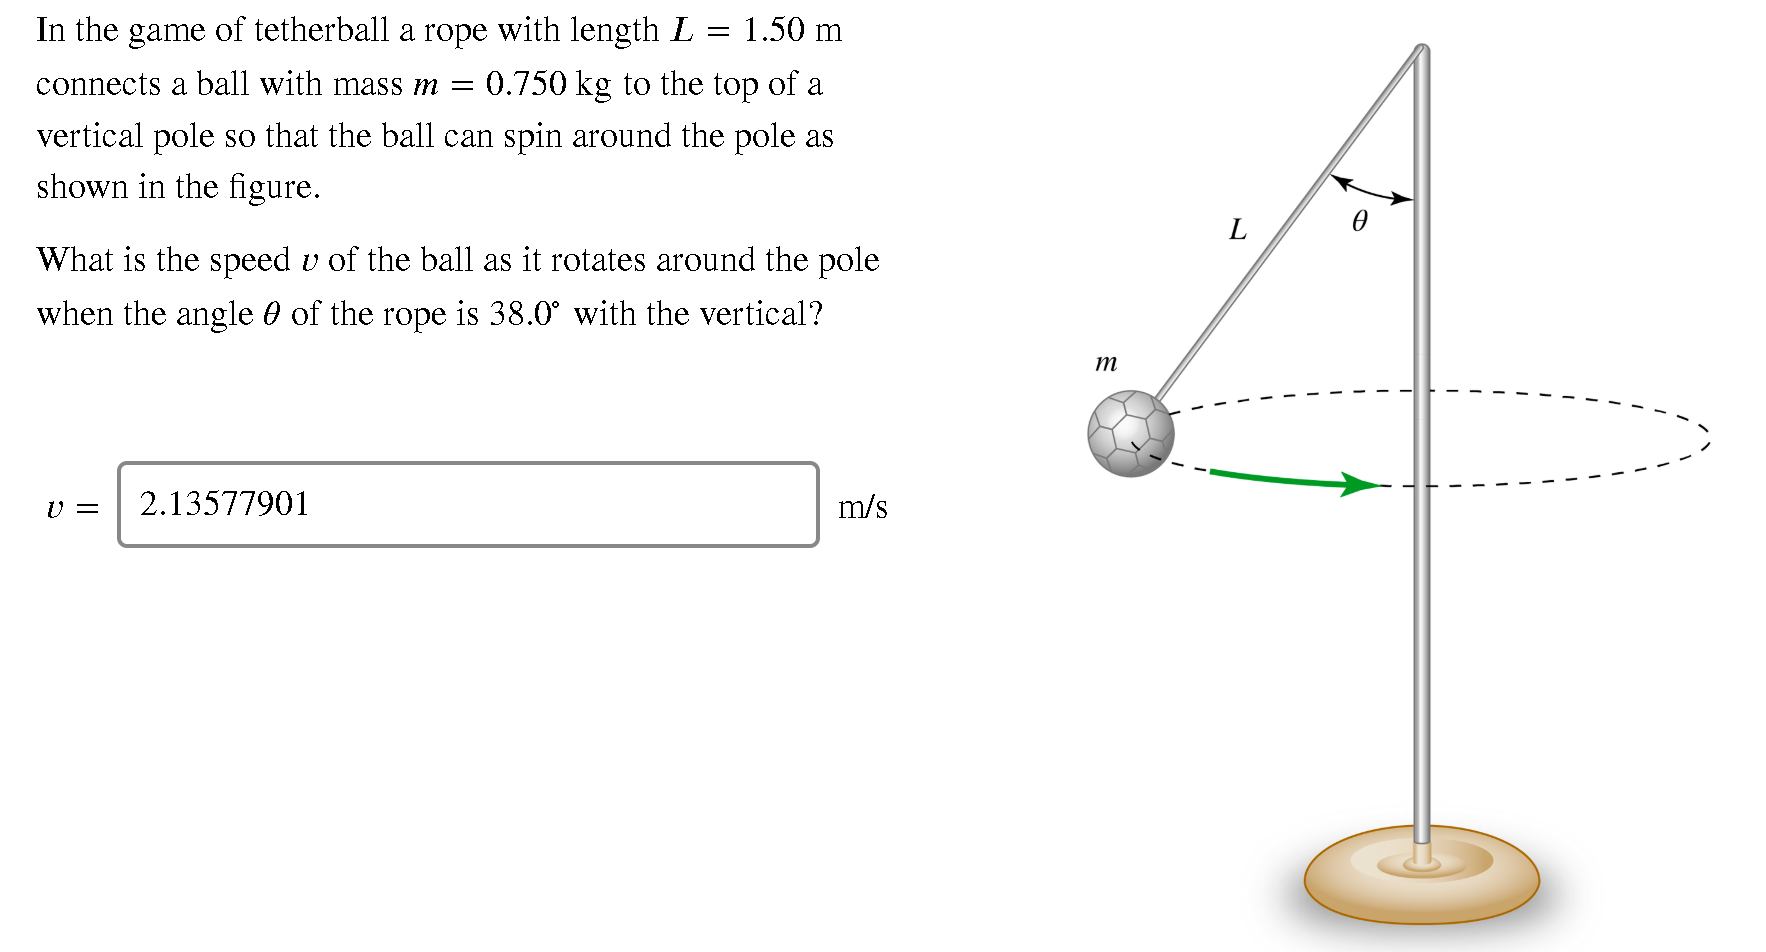 In the game of tetherball a rope with length L
1.50 m
connects a ball with mass m = 0.750 kg to the top of a
vertical pole so that the ball can spin around the pole as
shown in the figure.
What is the speed v of the ball as it rotates around the pole
when the angle 0 of the rope is 38.0° with the vertical?
